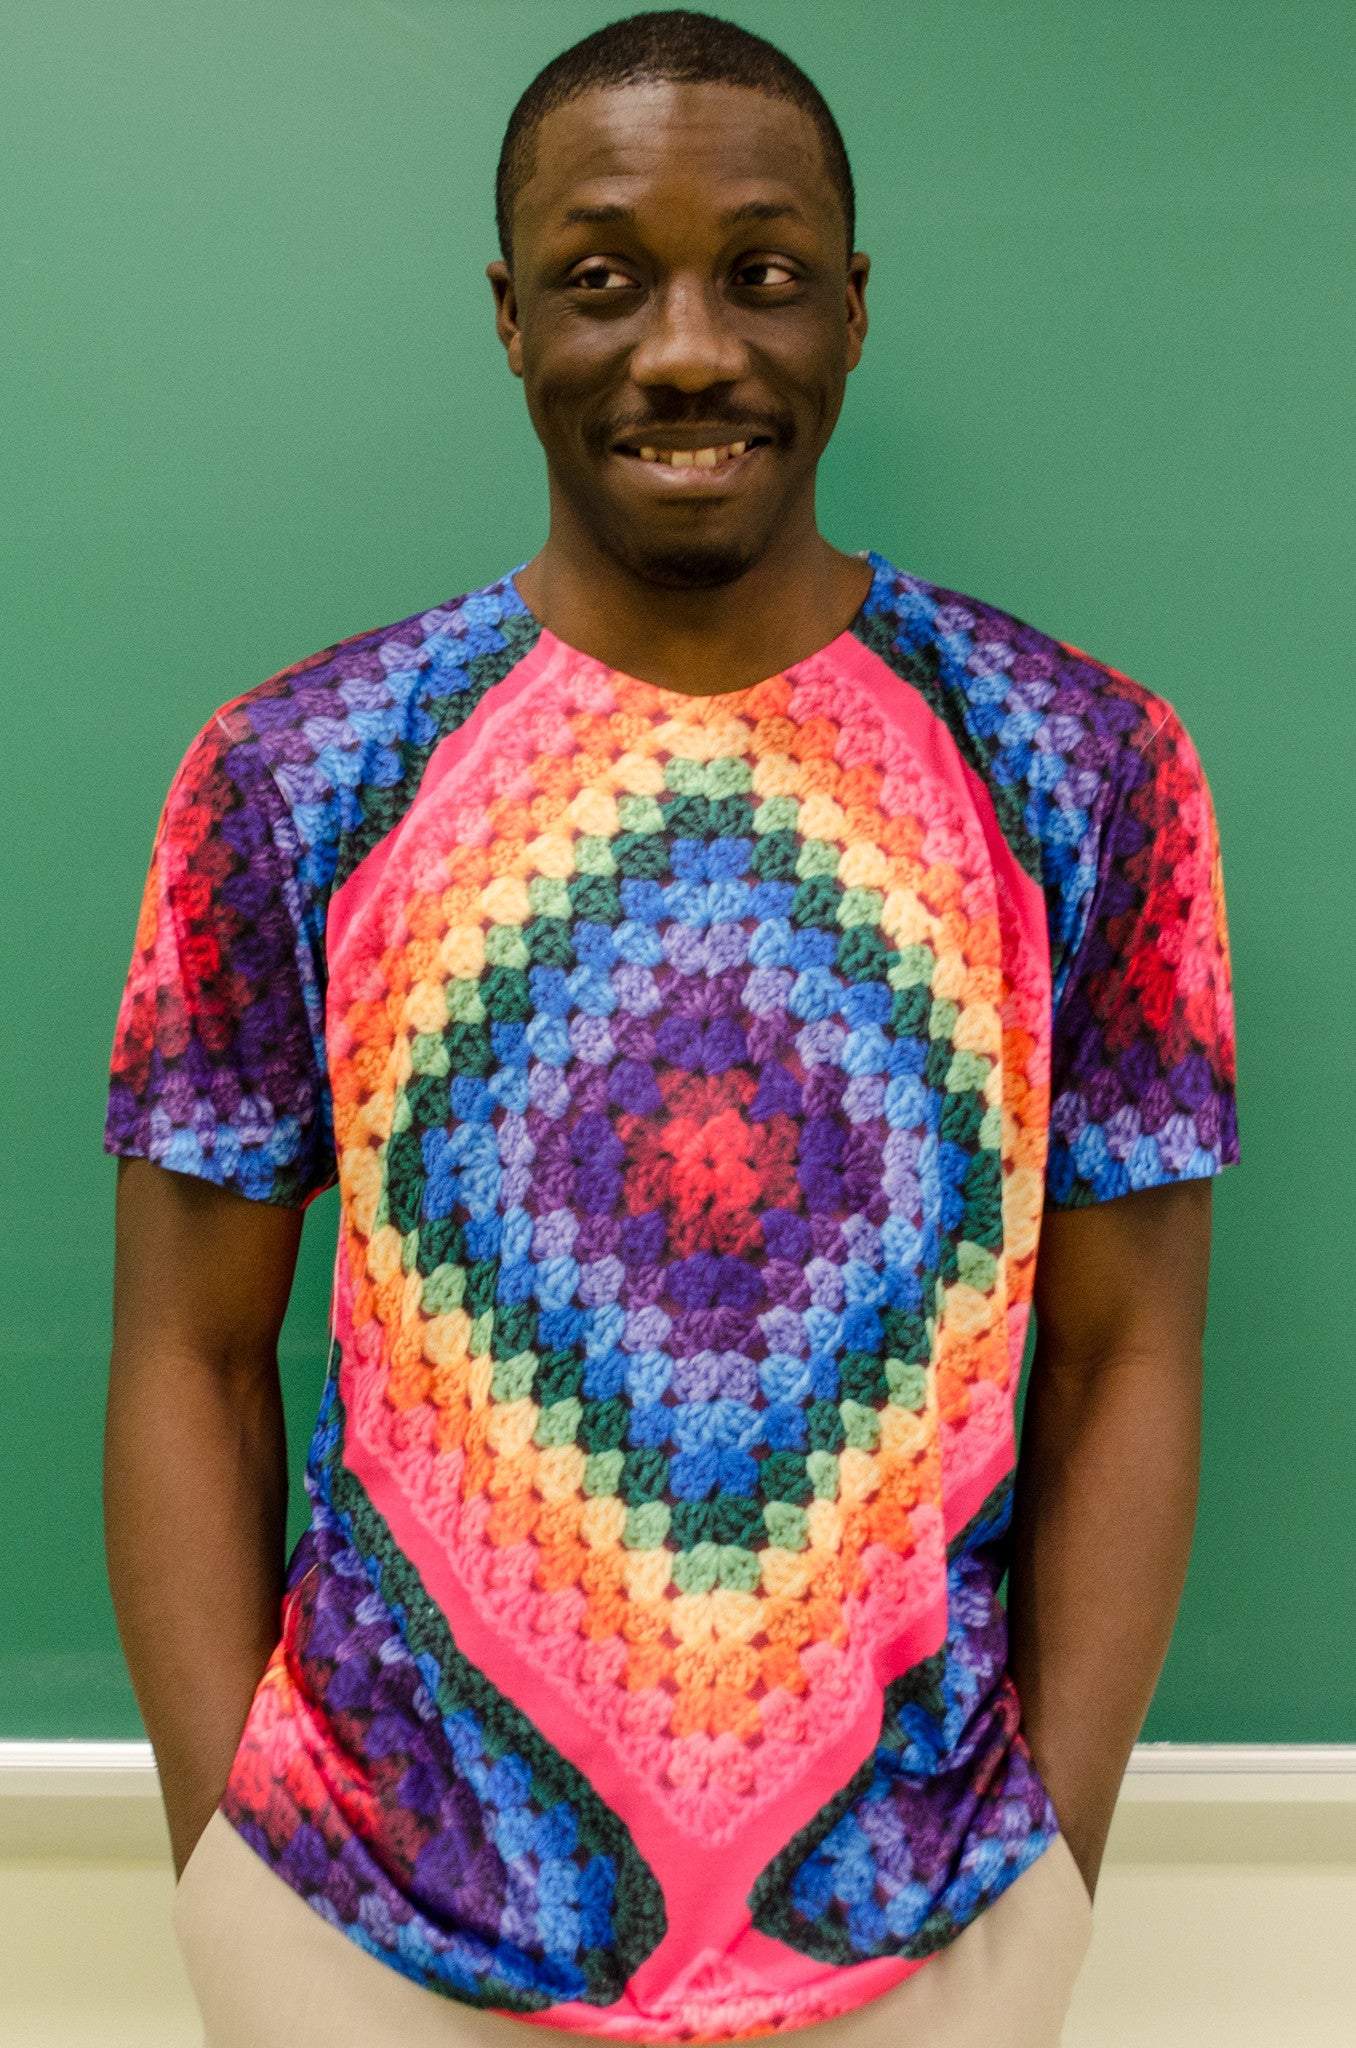 Snapdragon Brand Clothing Granny Square Crochet Print rainbow tie-dye t-shirt in style Rainbow Soul features a vintage psychedelic hippie boho feel and a rainbow of colors. Made of comfortable polyester.